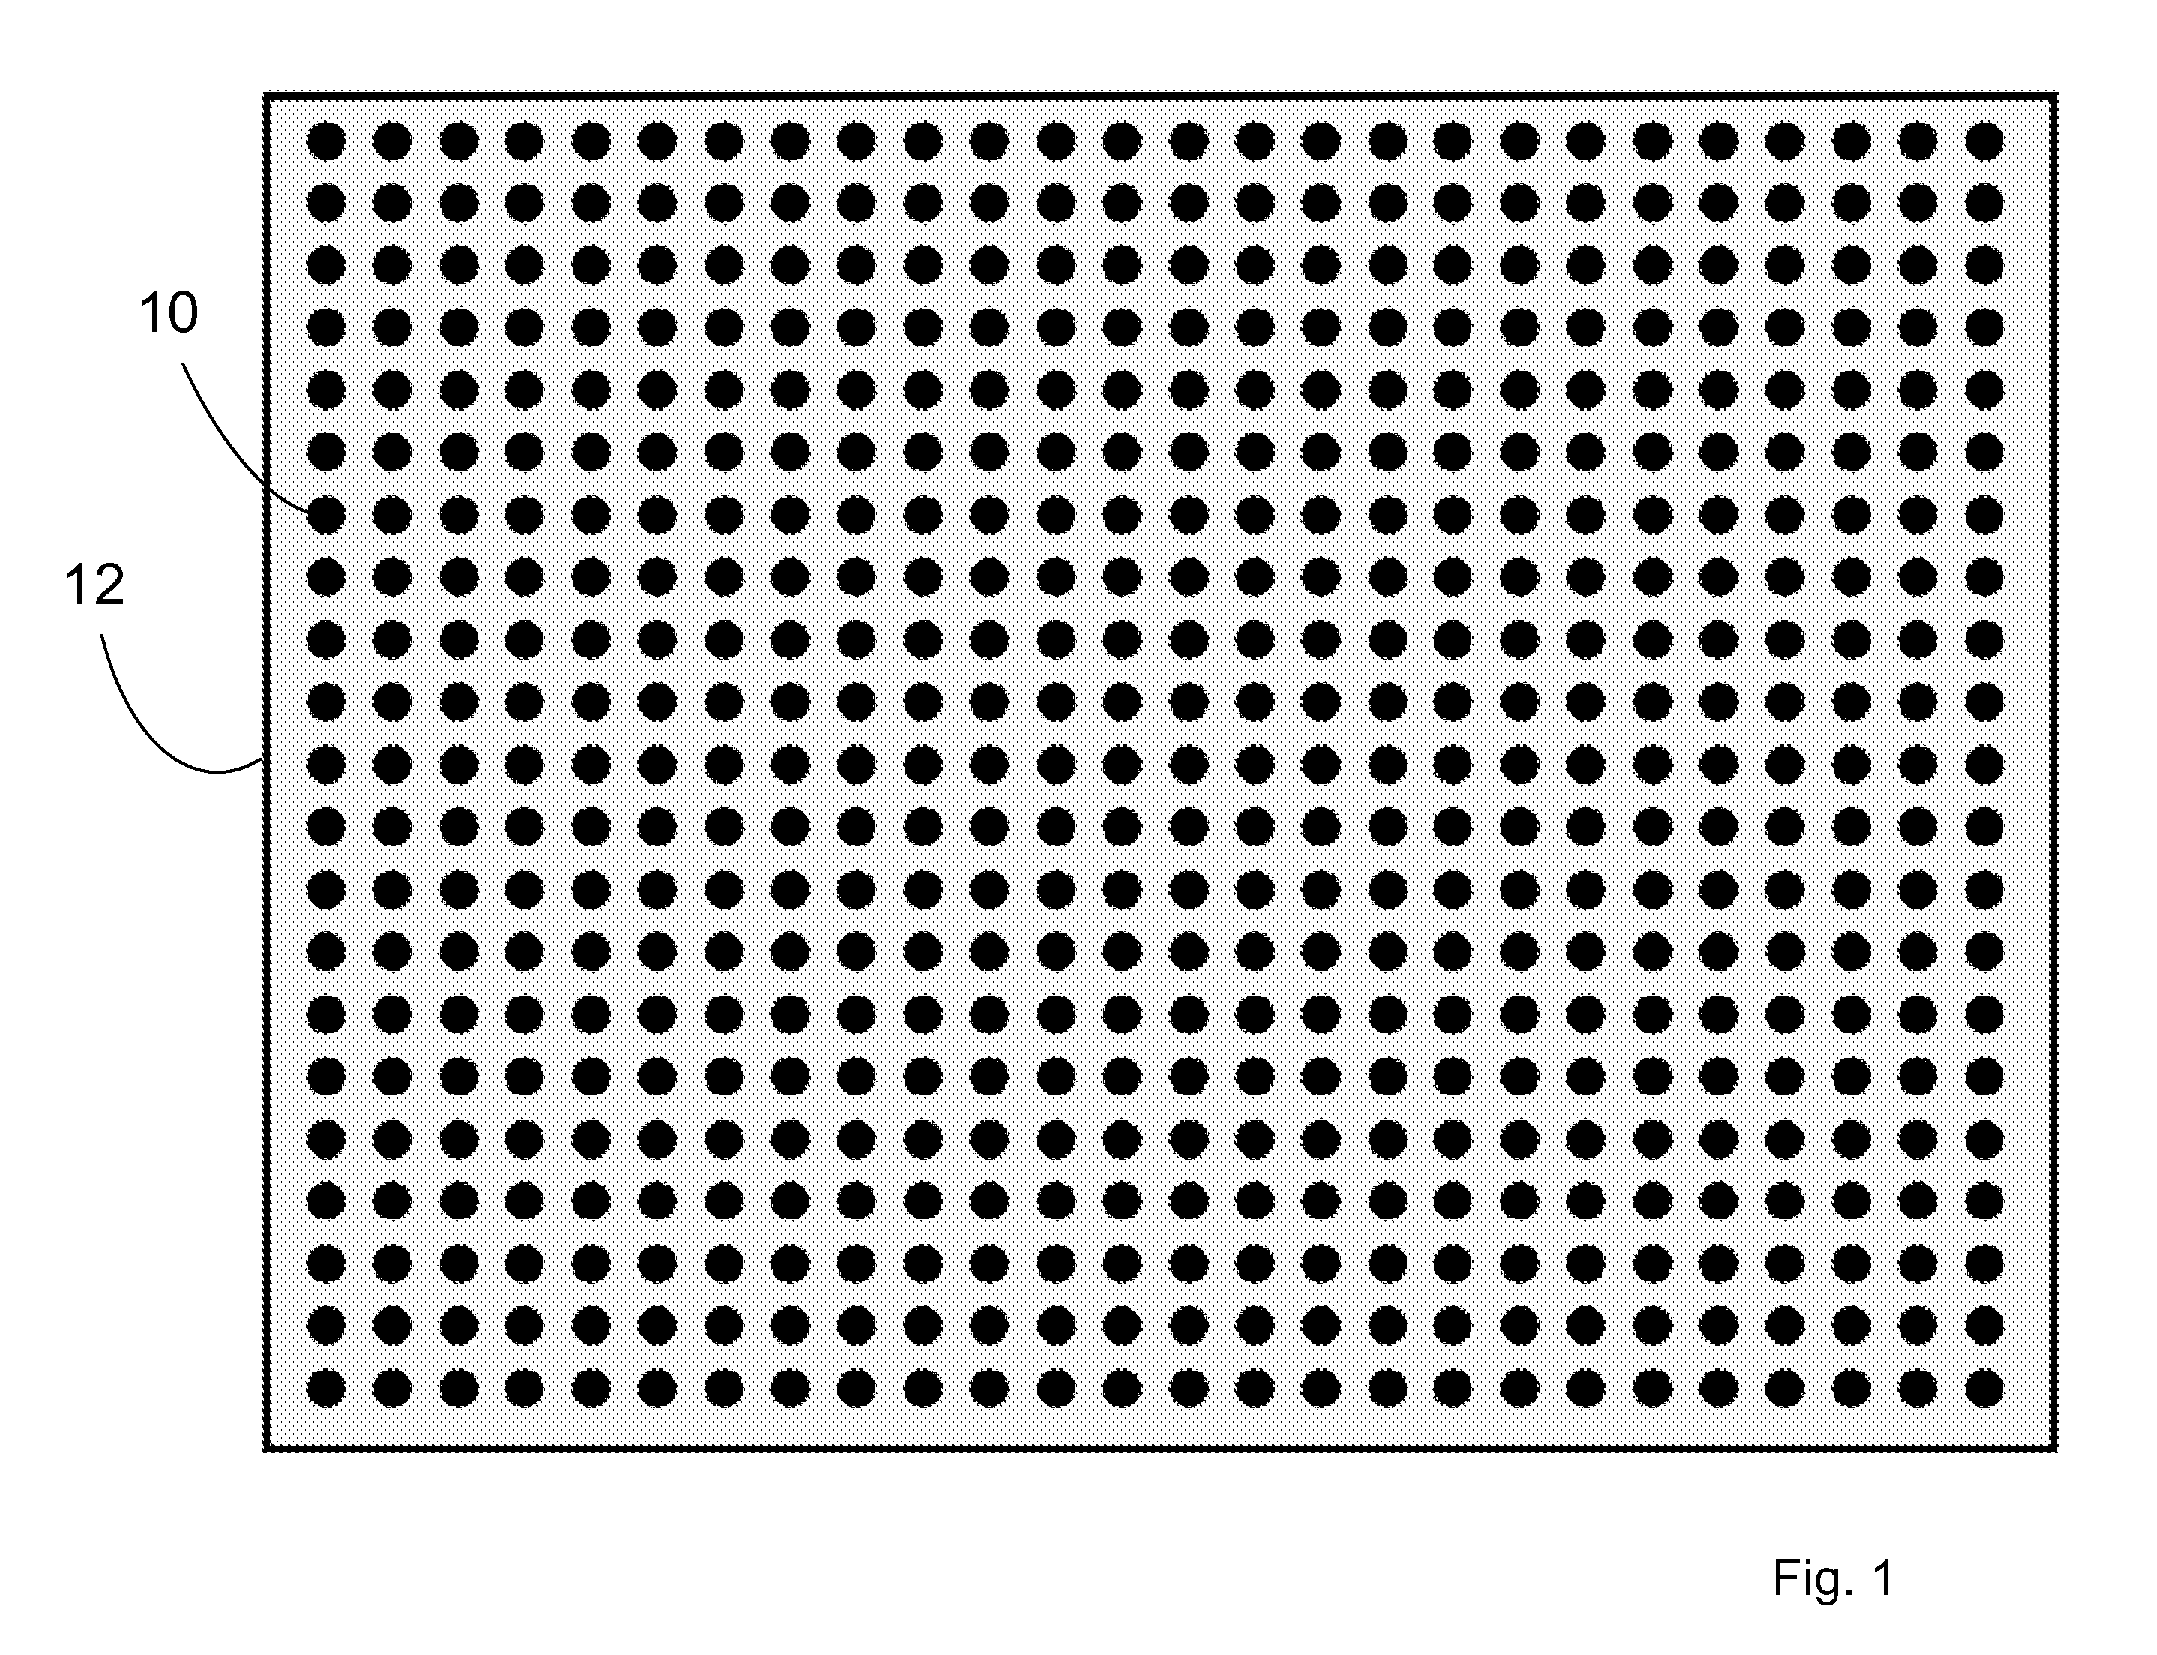 Method and Apparatus for Preventing Birds from Colliding with or Striking Flat Clear and Tinted Glass and Plastic Surfaces